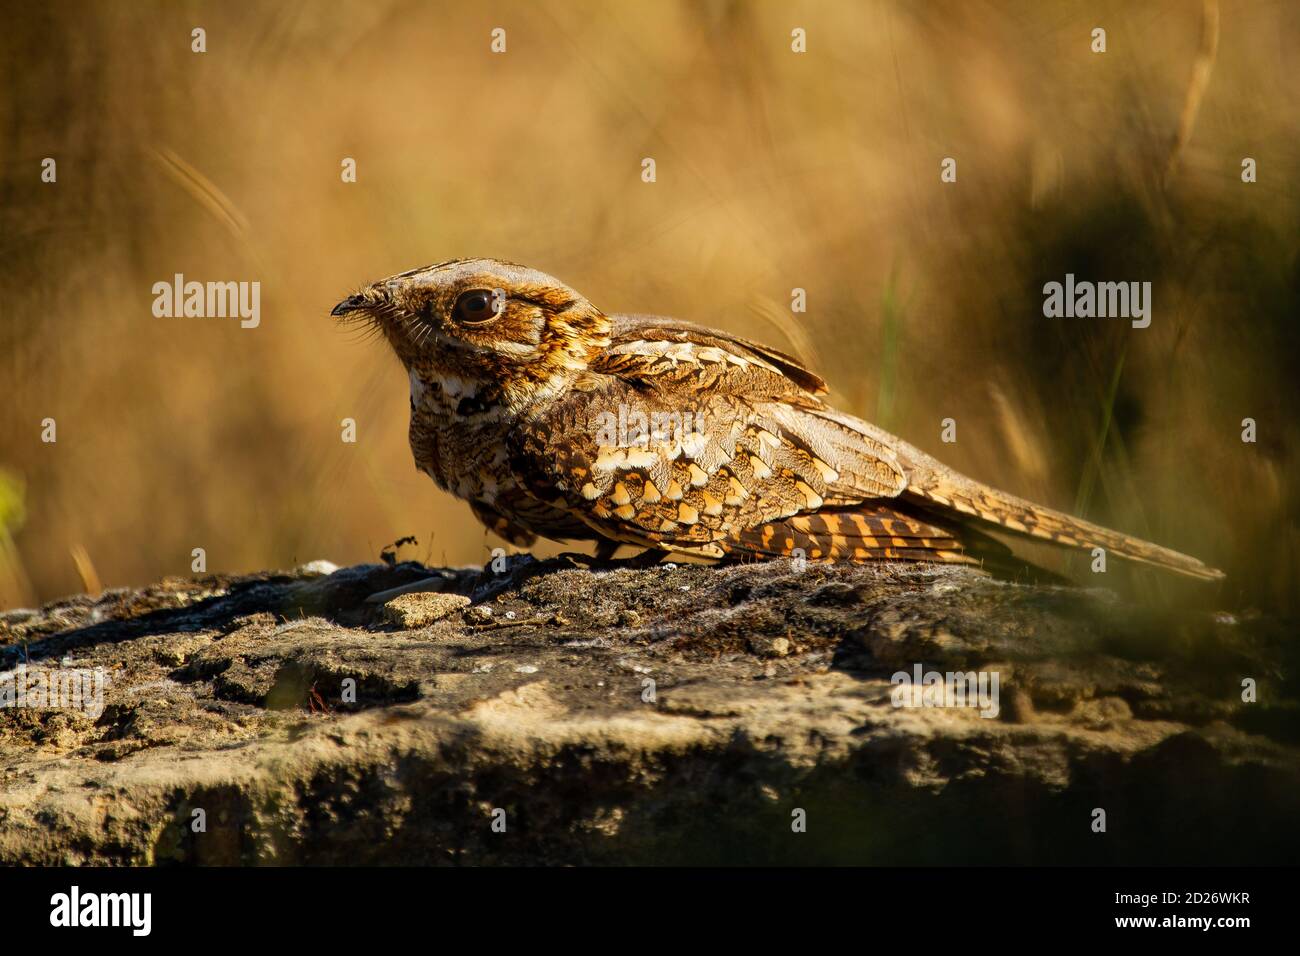 Closeup shot of a red-necked nightjar sitting on a rock Stock Photo